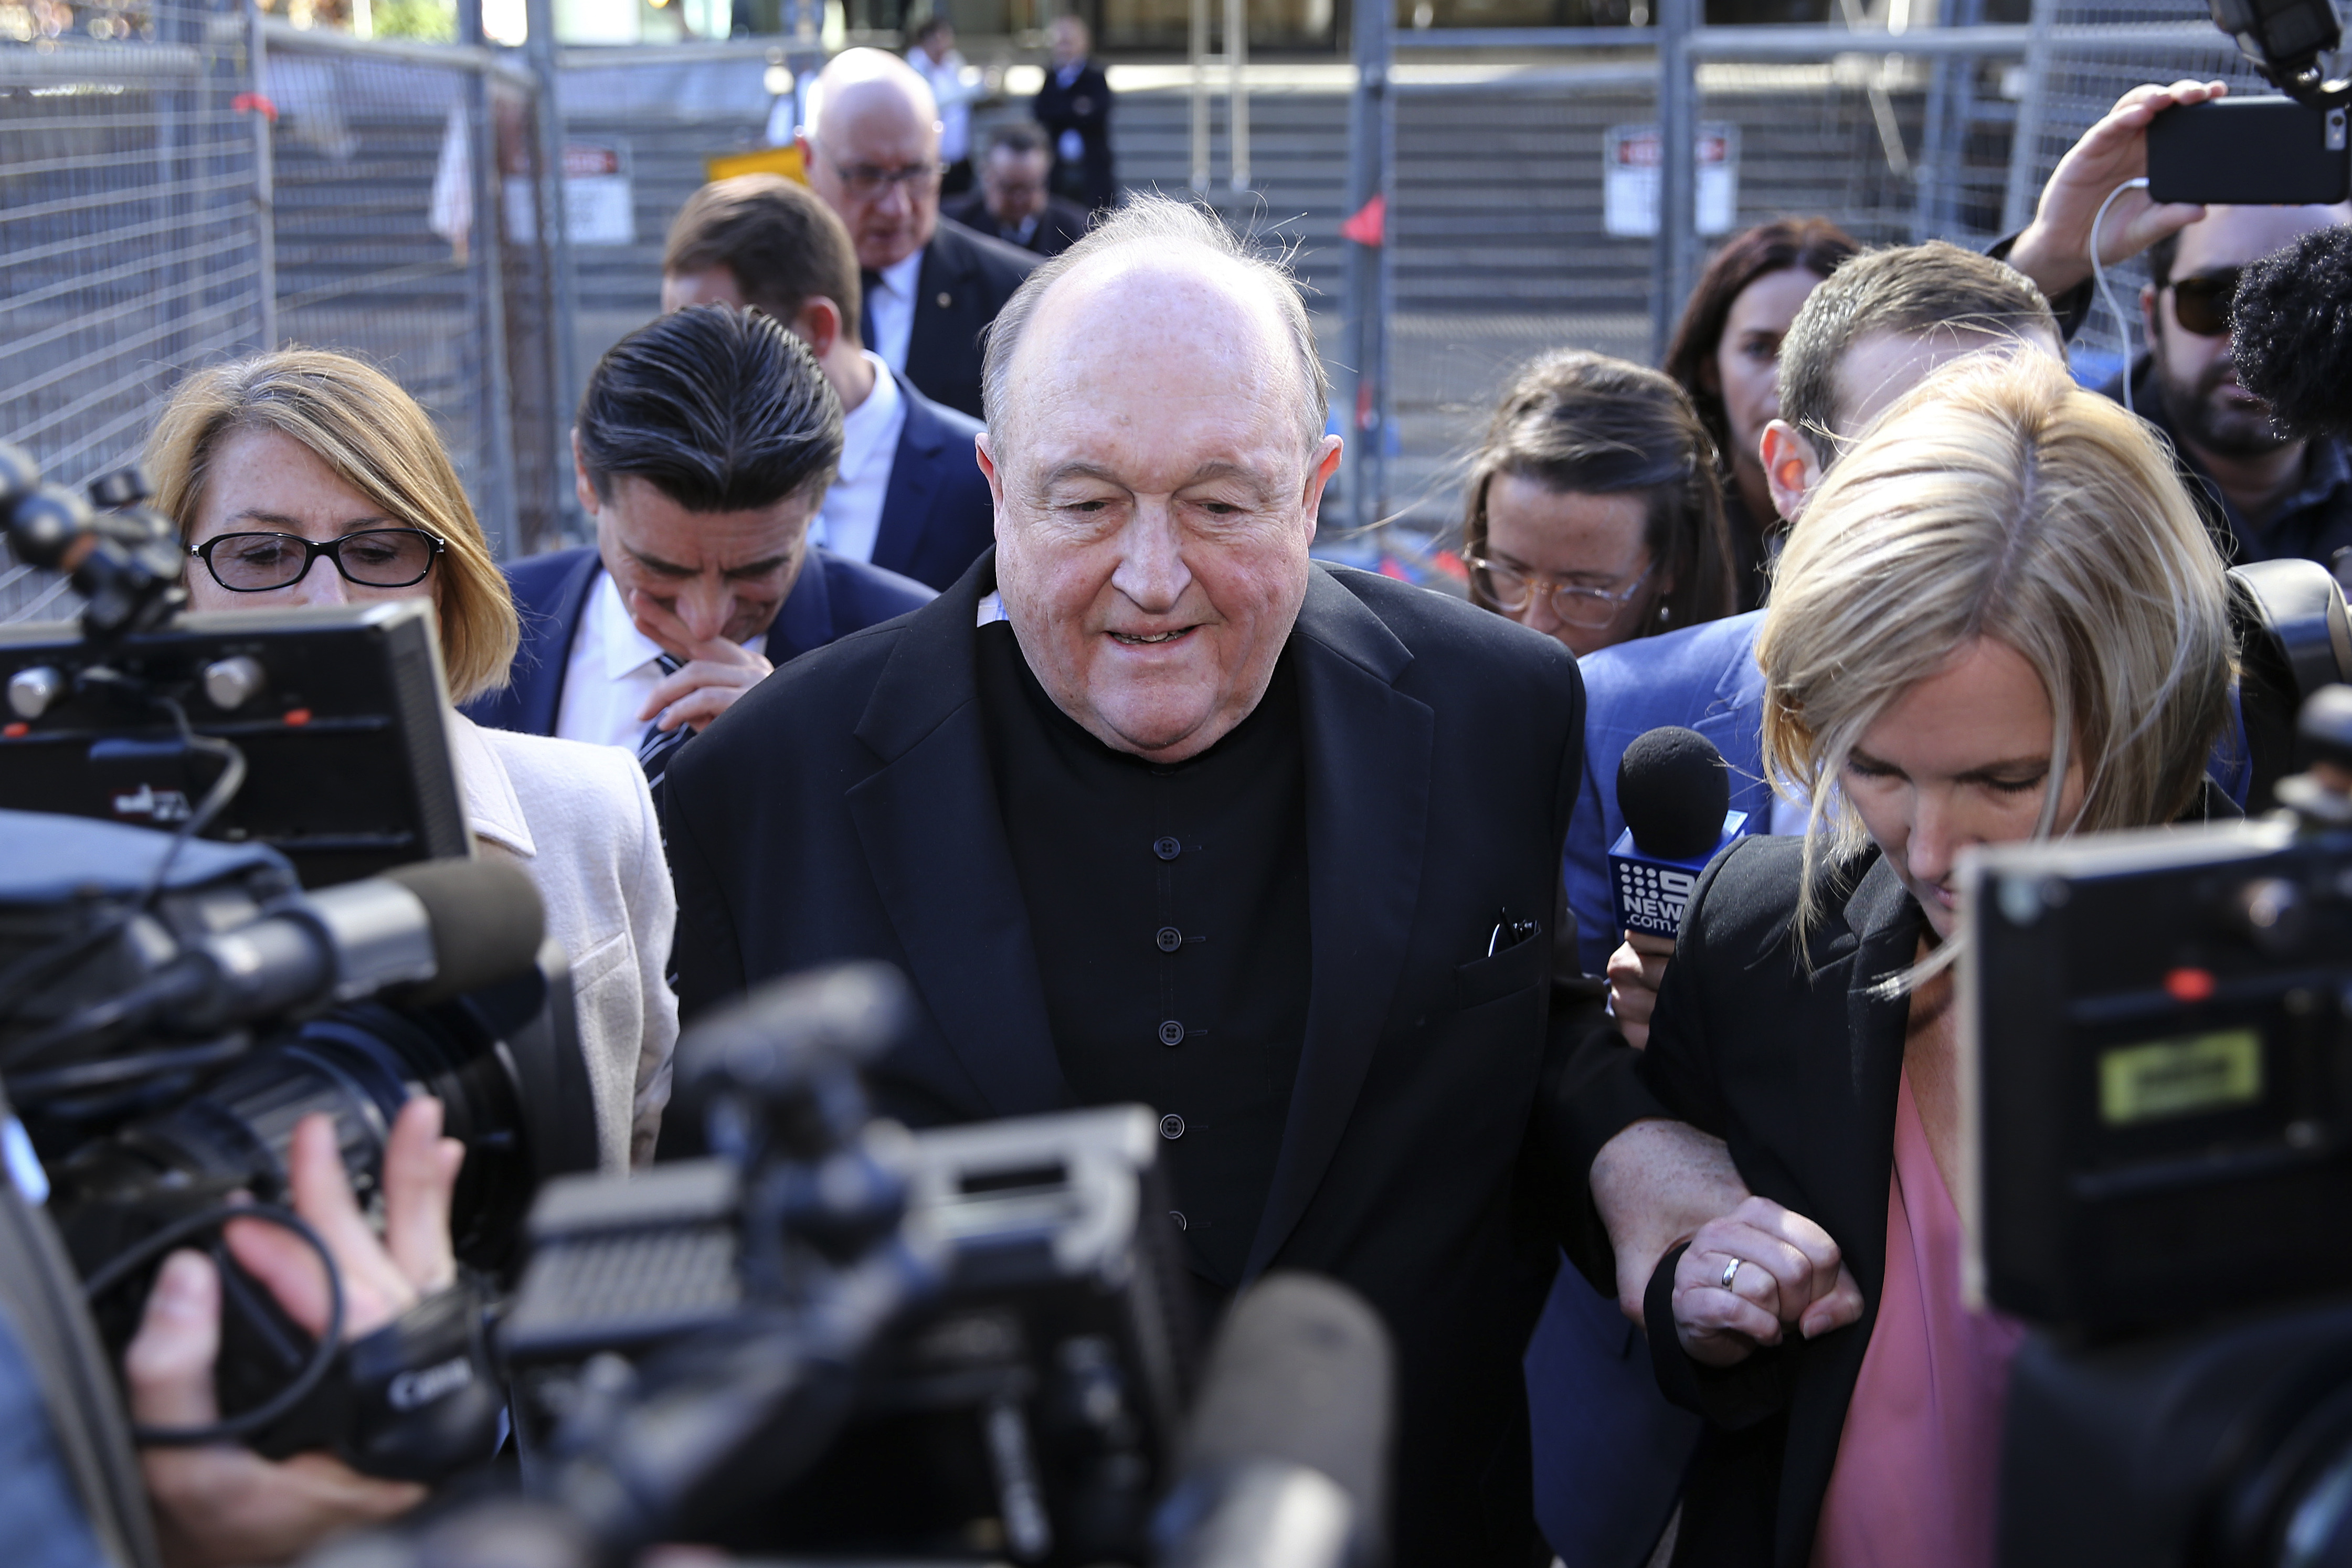 Archbishop Wilson stands down following concealing sex abuse conviction 